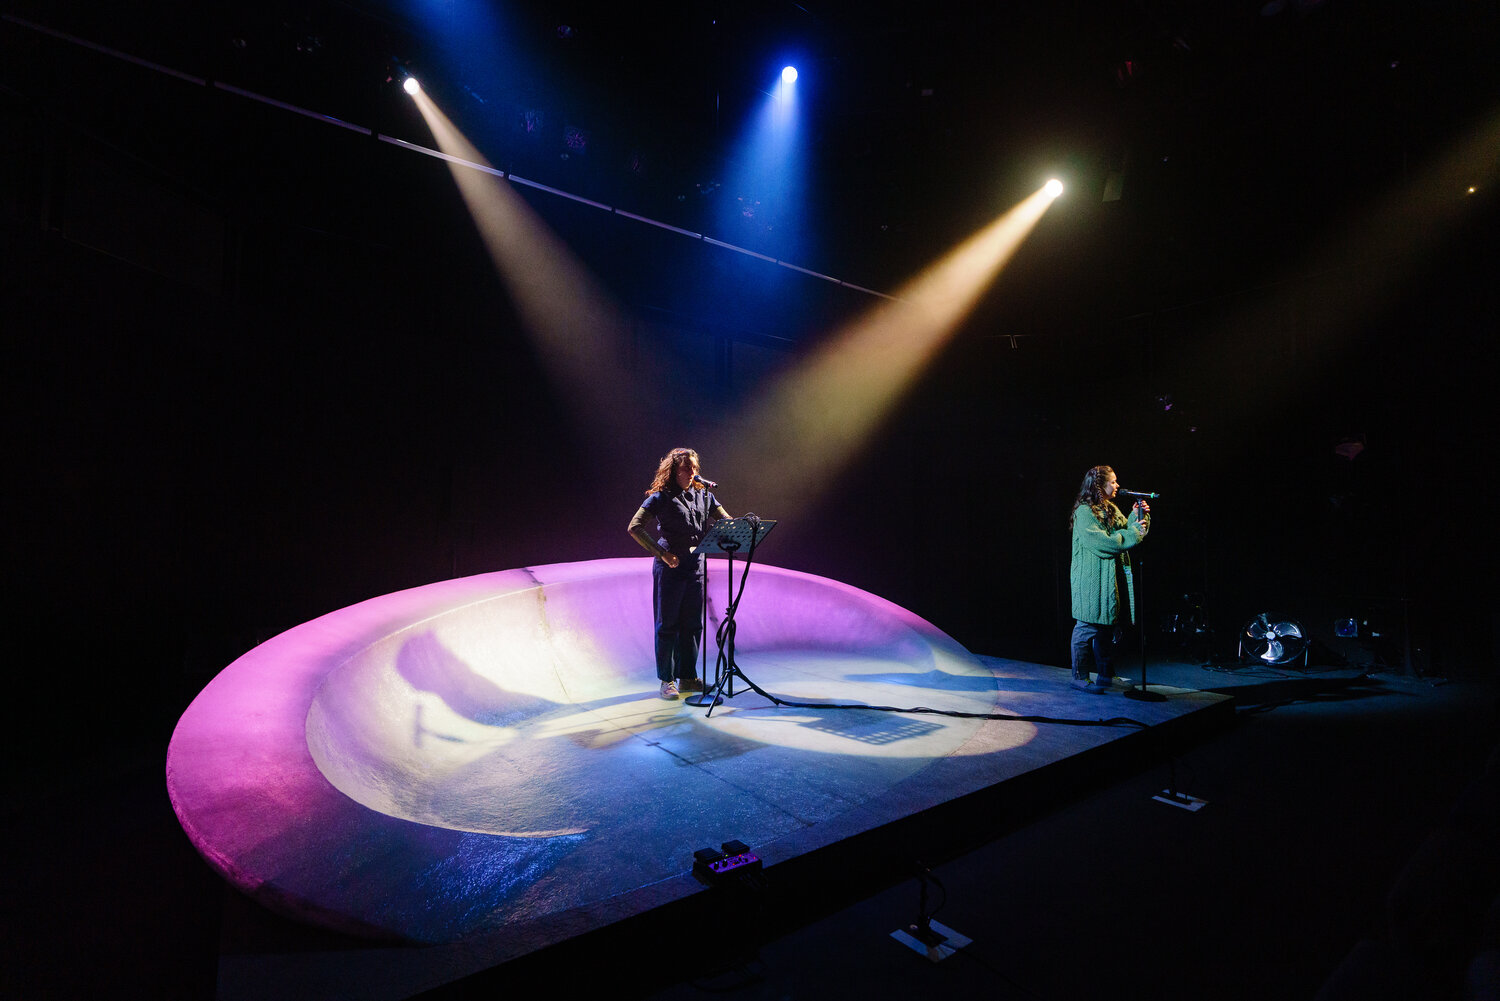 From left, Julia Murray and Lois Craig in “Islander,” a new musical with set design by award winning Scenic Designer Emma Bailey.